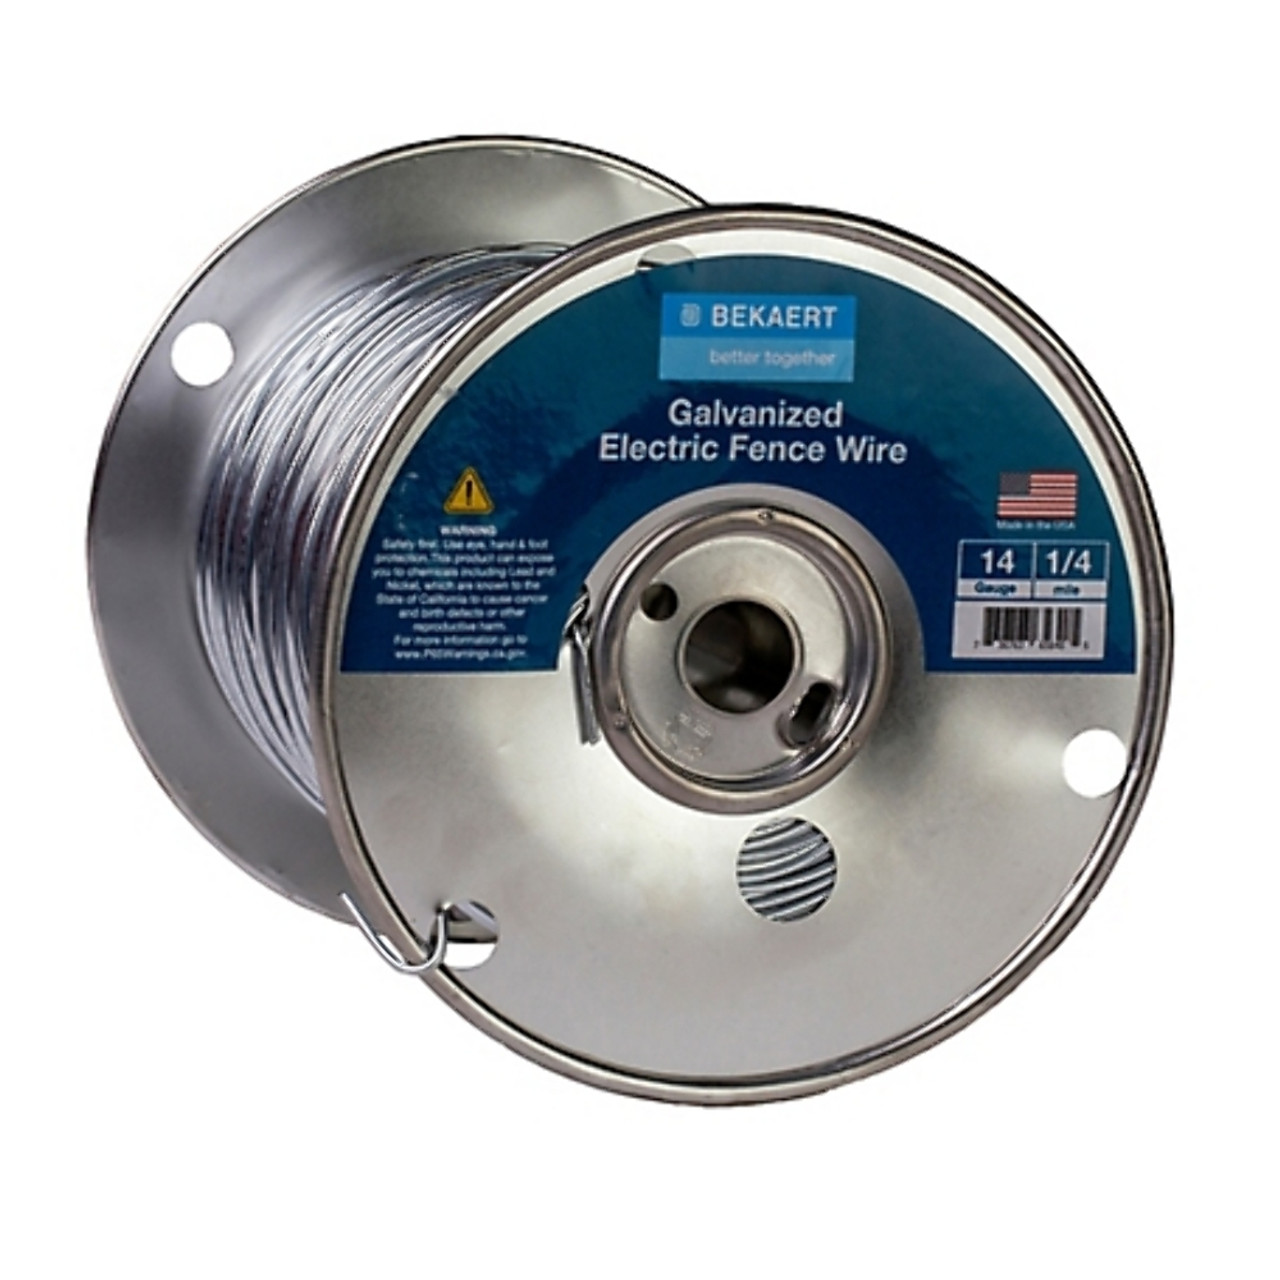 Bekaert Galvanized Electric Fence Wire 14G 1/4 Mile or 1,320'